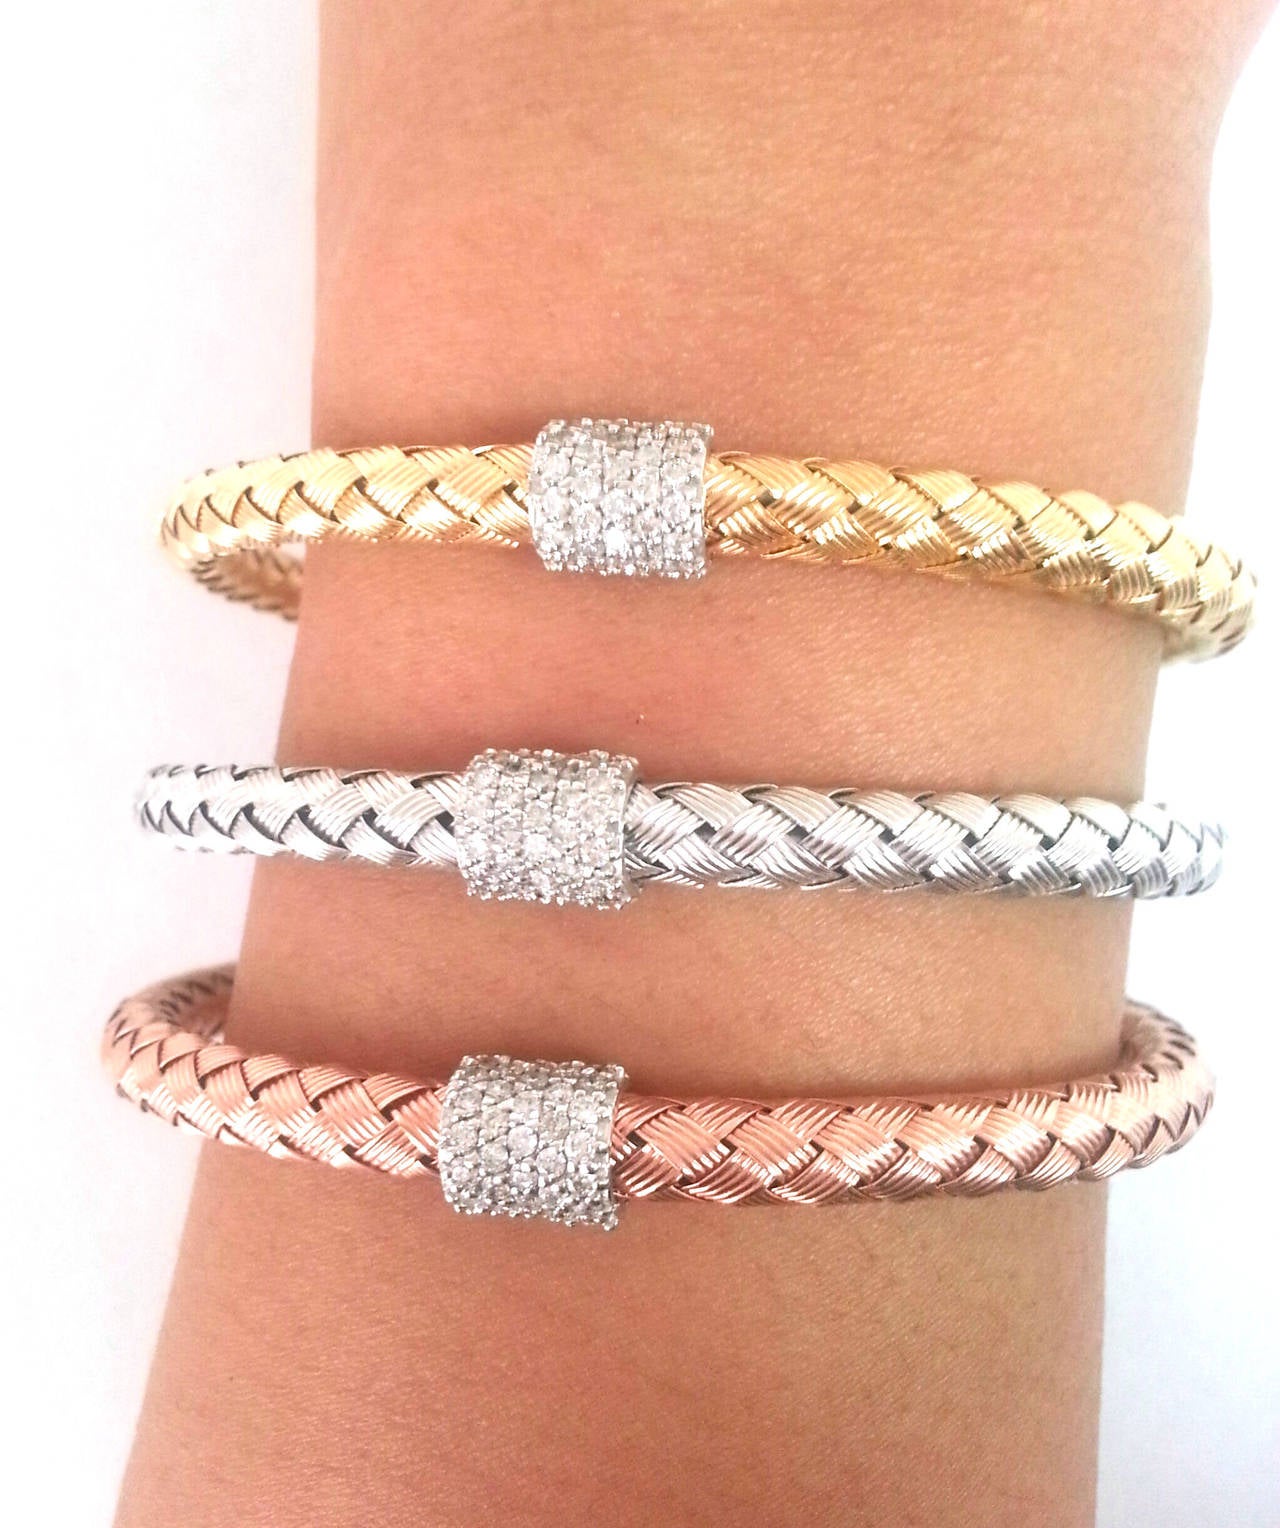 A set of three diamond bangles to be stacked the way you like! These bangles have been made with lots of generous gold which gives them a nice heavy weight and rich feel.
  
A 14k white gold, yellow gold, and rose gold mesh woven style bangles